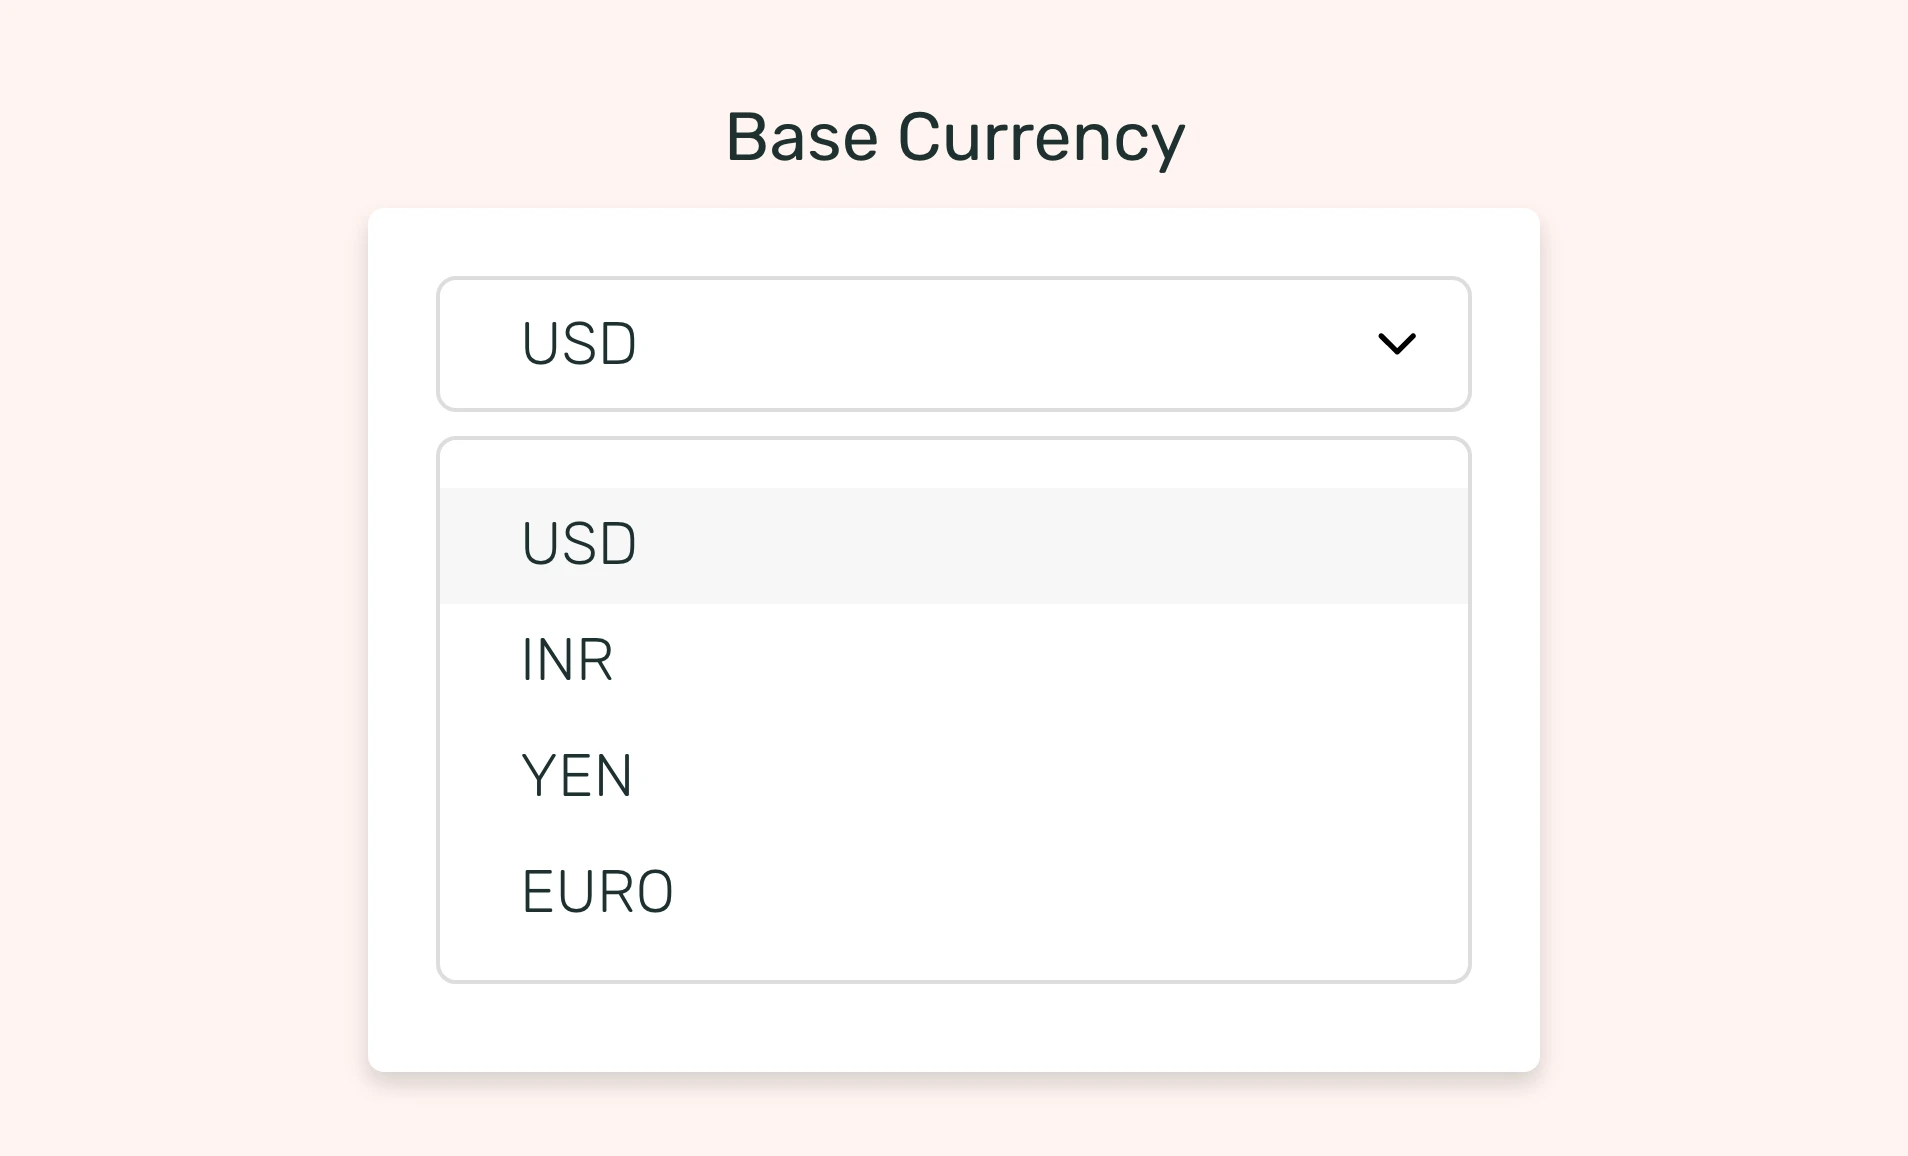 Currency Exchange Rate app interface showing base currency options like USD, INR, YEN etc., to display on digital signage screens